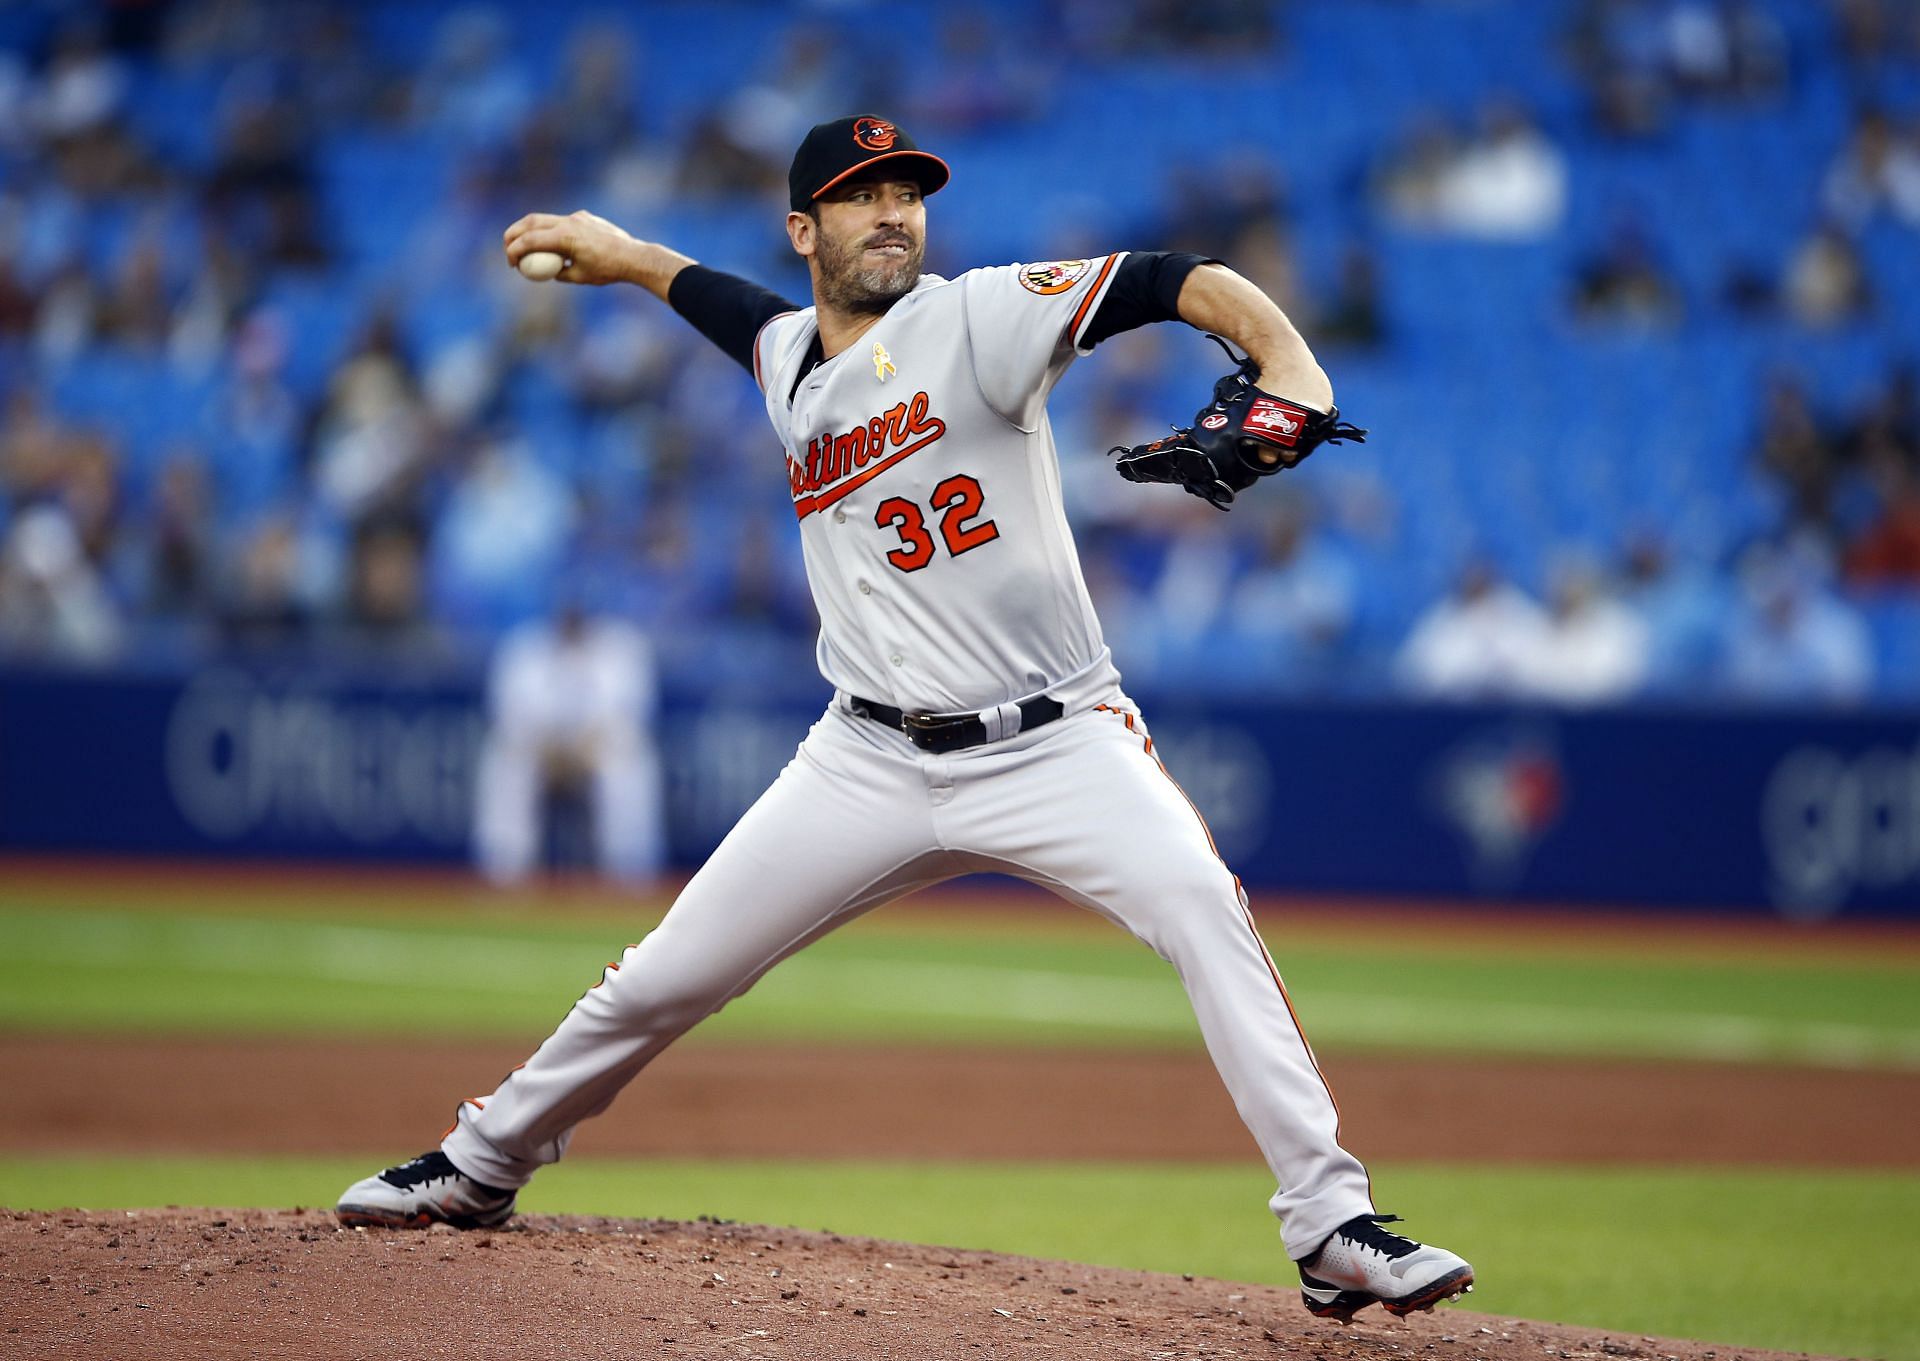 Matt Harvey of the Baltimore Orioles delivers a pitch.